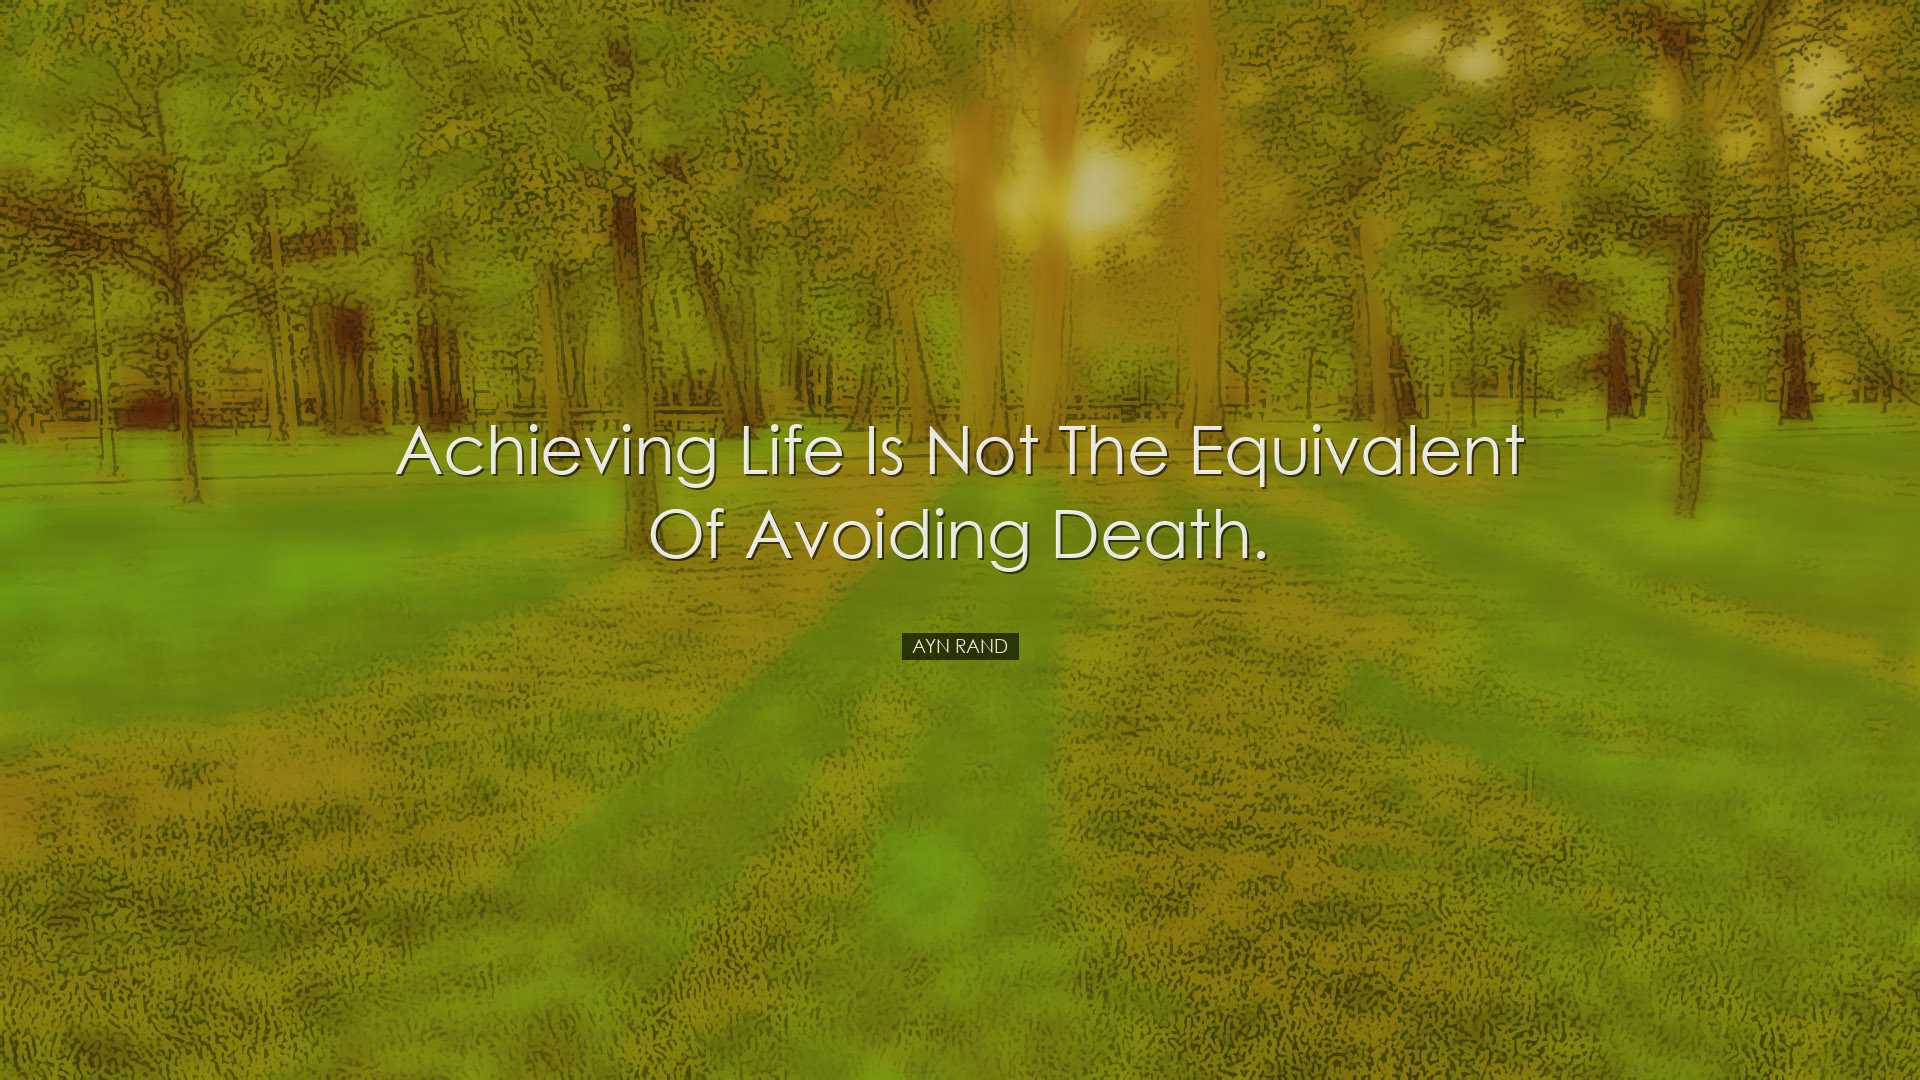 Achieving life is not the equivalent of avoiding death. - Ayn Rand